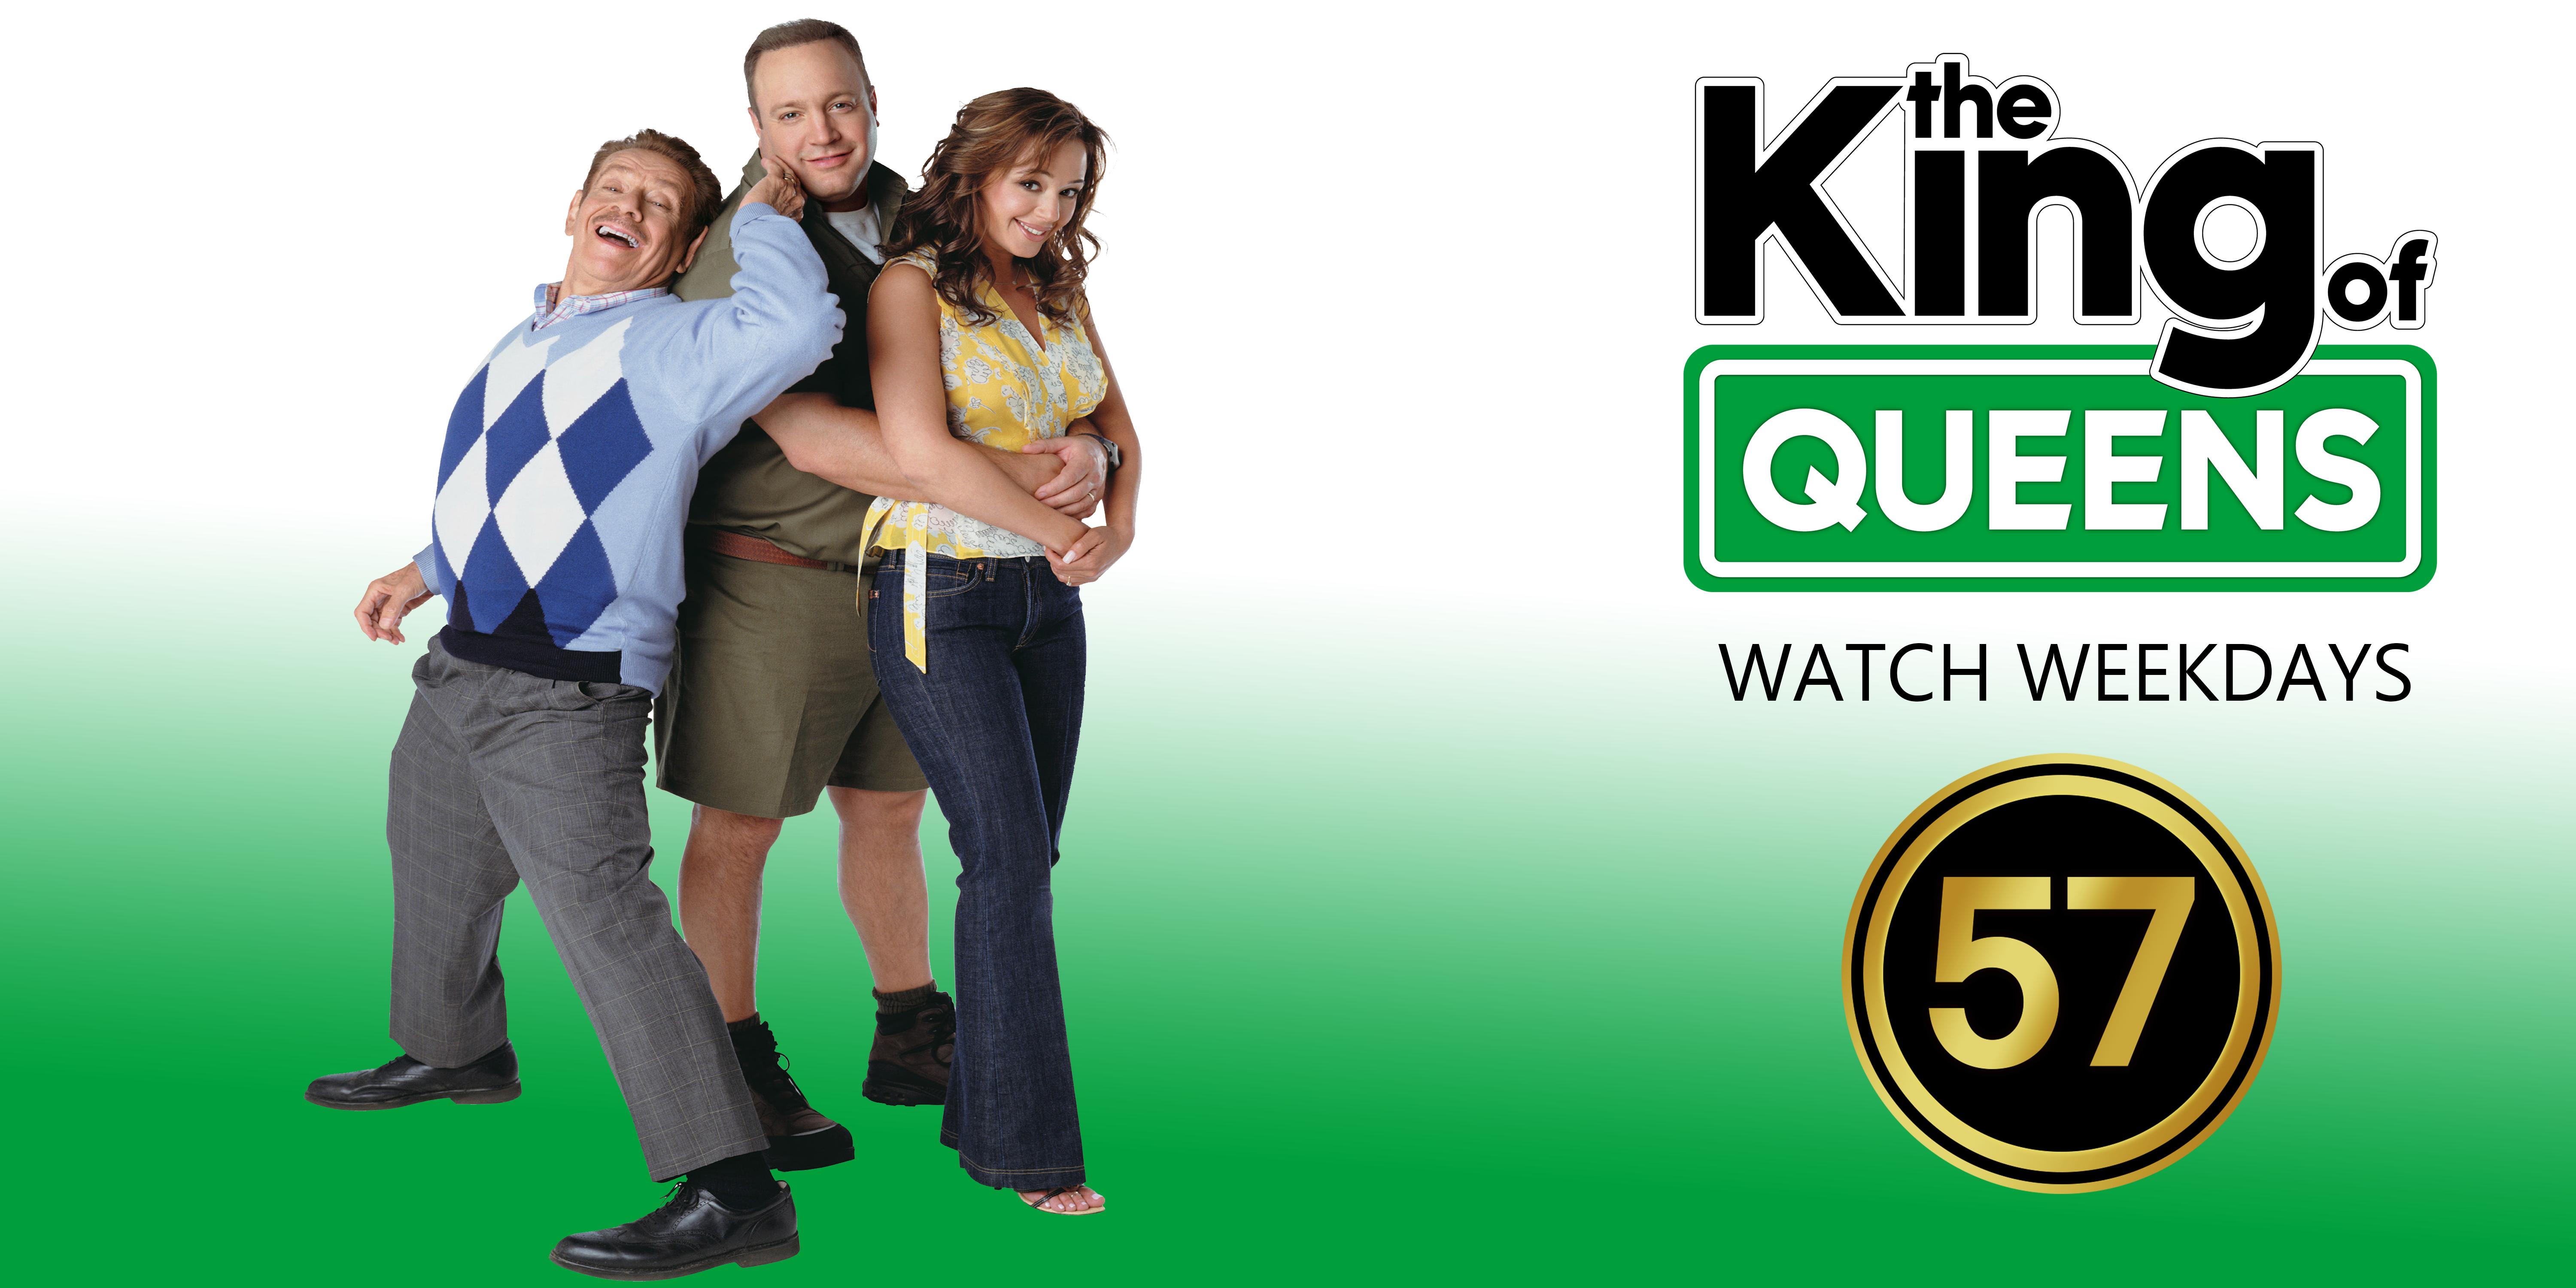 The King of Queens Logo - The King of Queens. WIFS's 57 Television